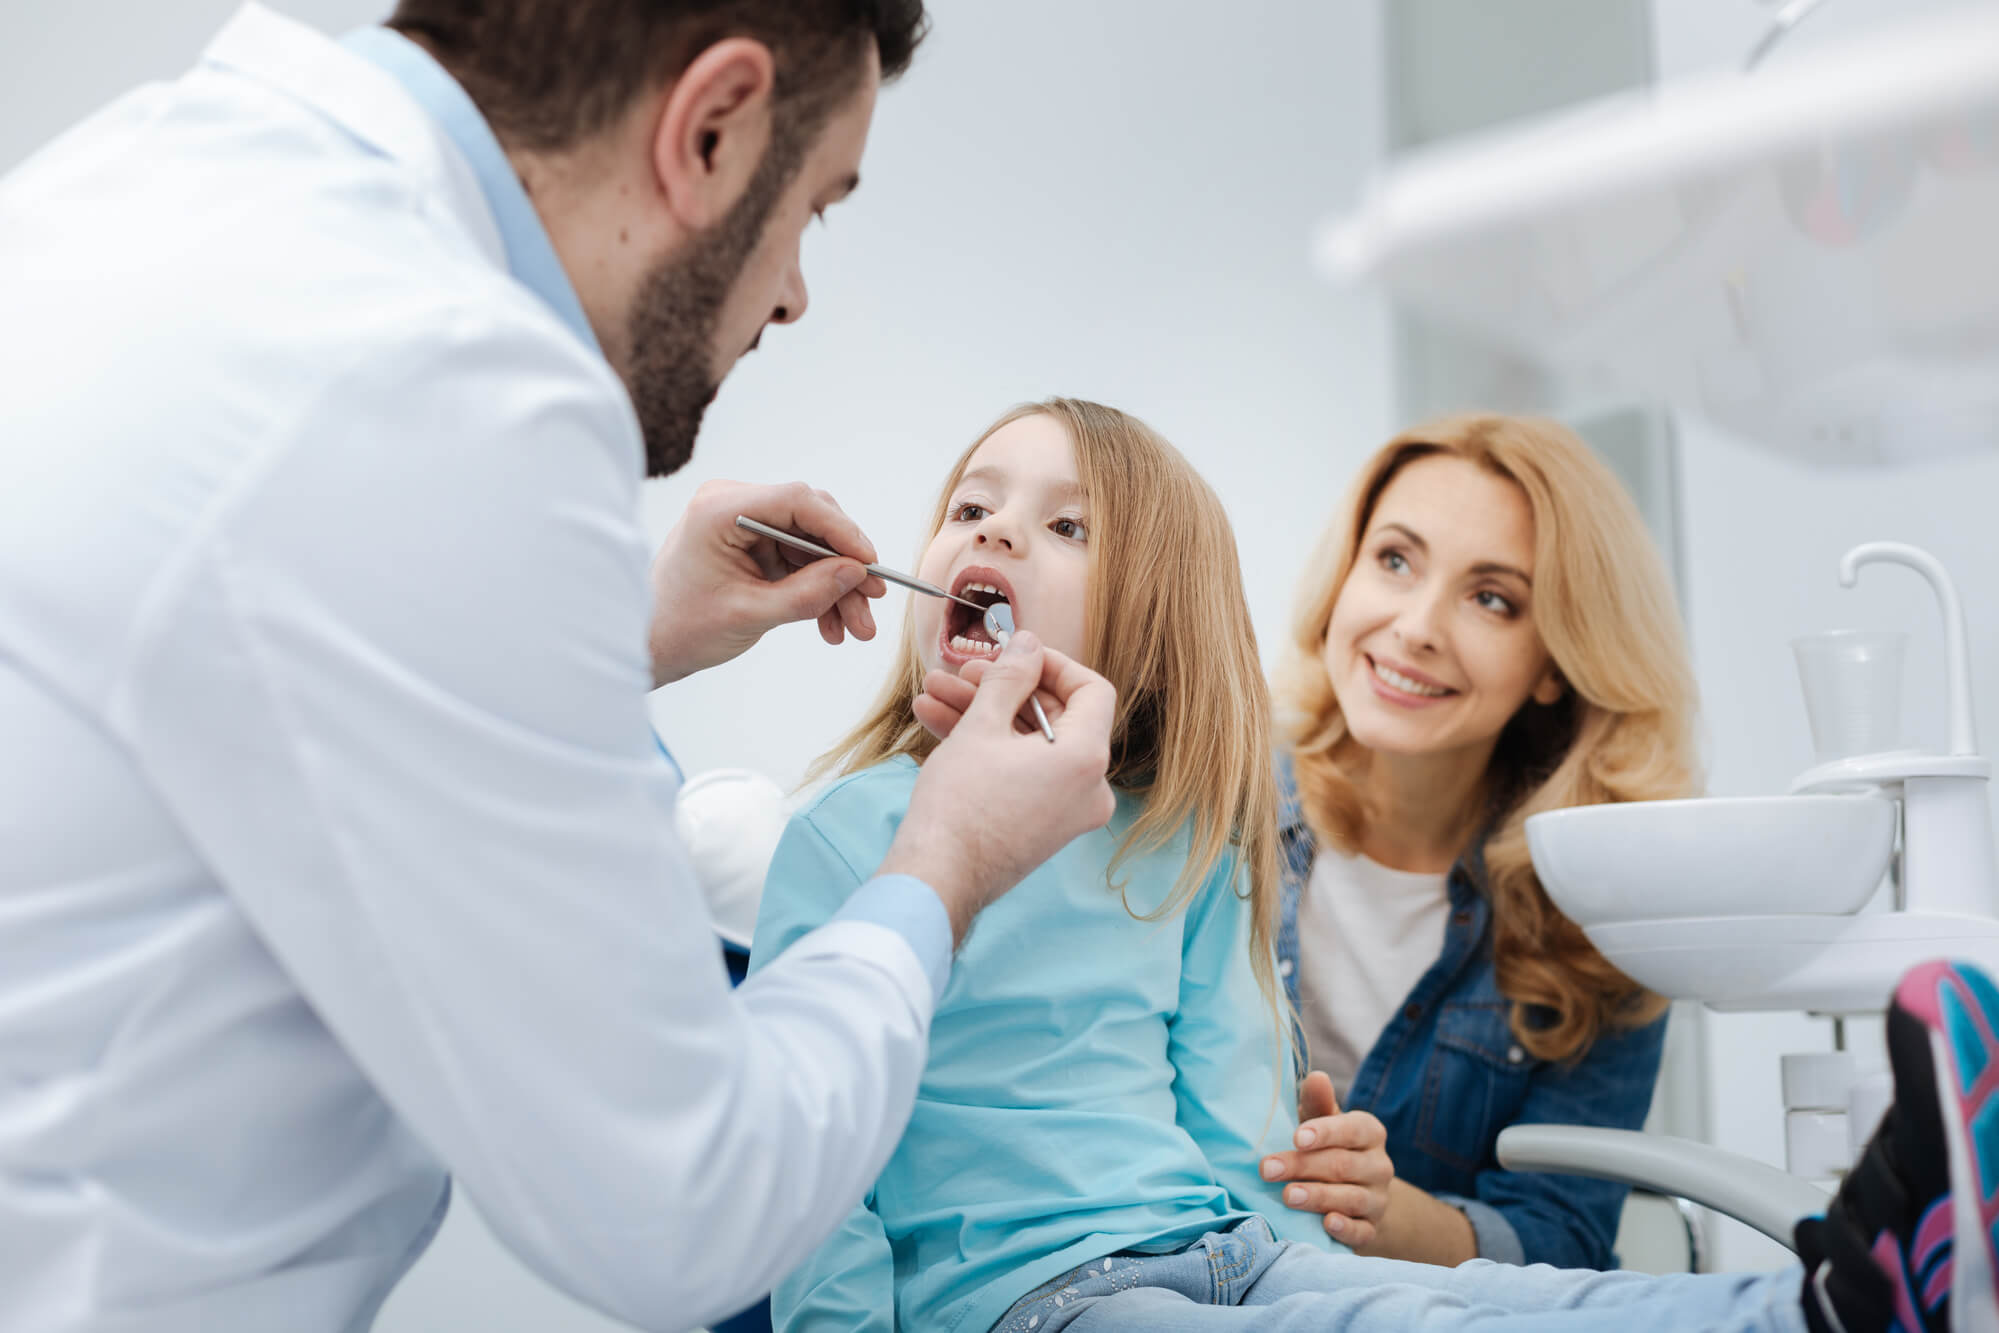 A Pediatric Dentist in Raleigh examines a little girl's teeth while her mother looks on